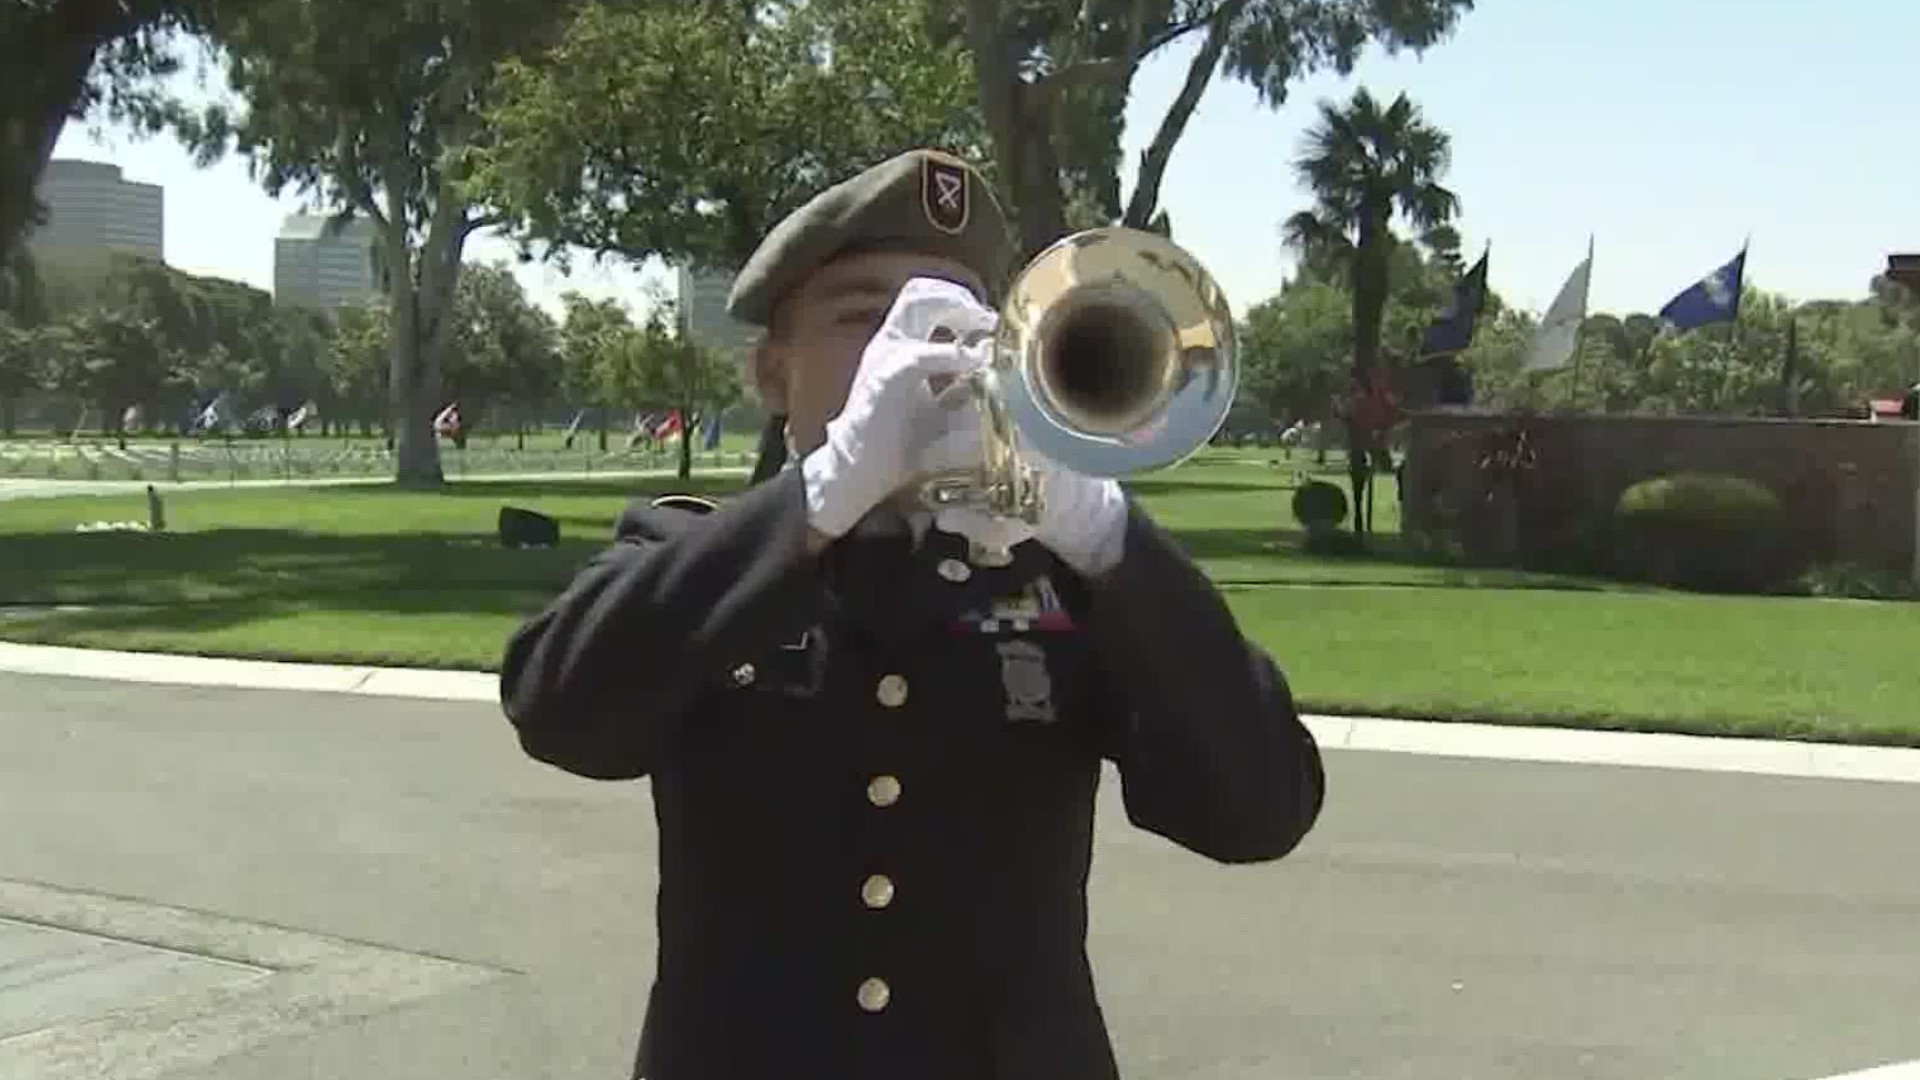 Some cemeteries held socially distant and smaller ceremonies to pay tribute to veterans who died. Others held live streams or televised ceremonies for Memorial Day.